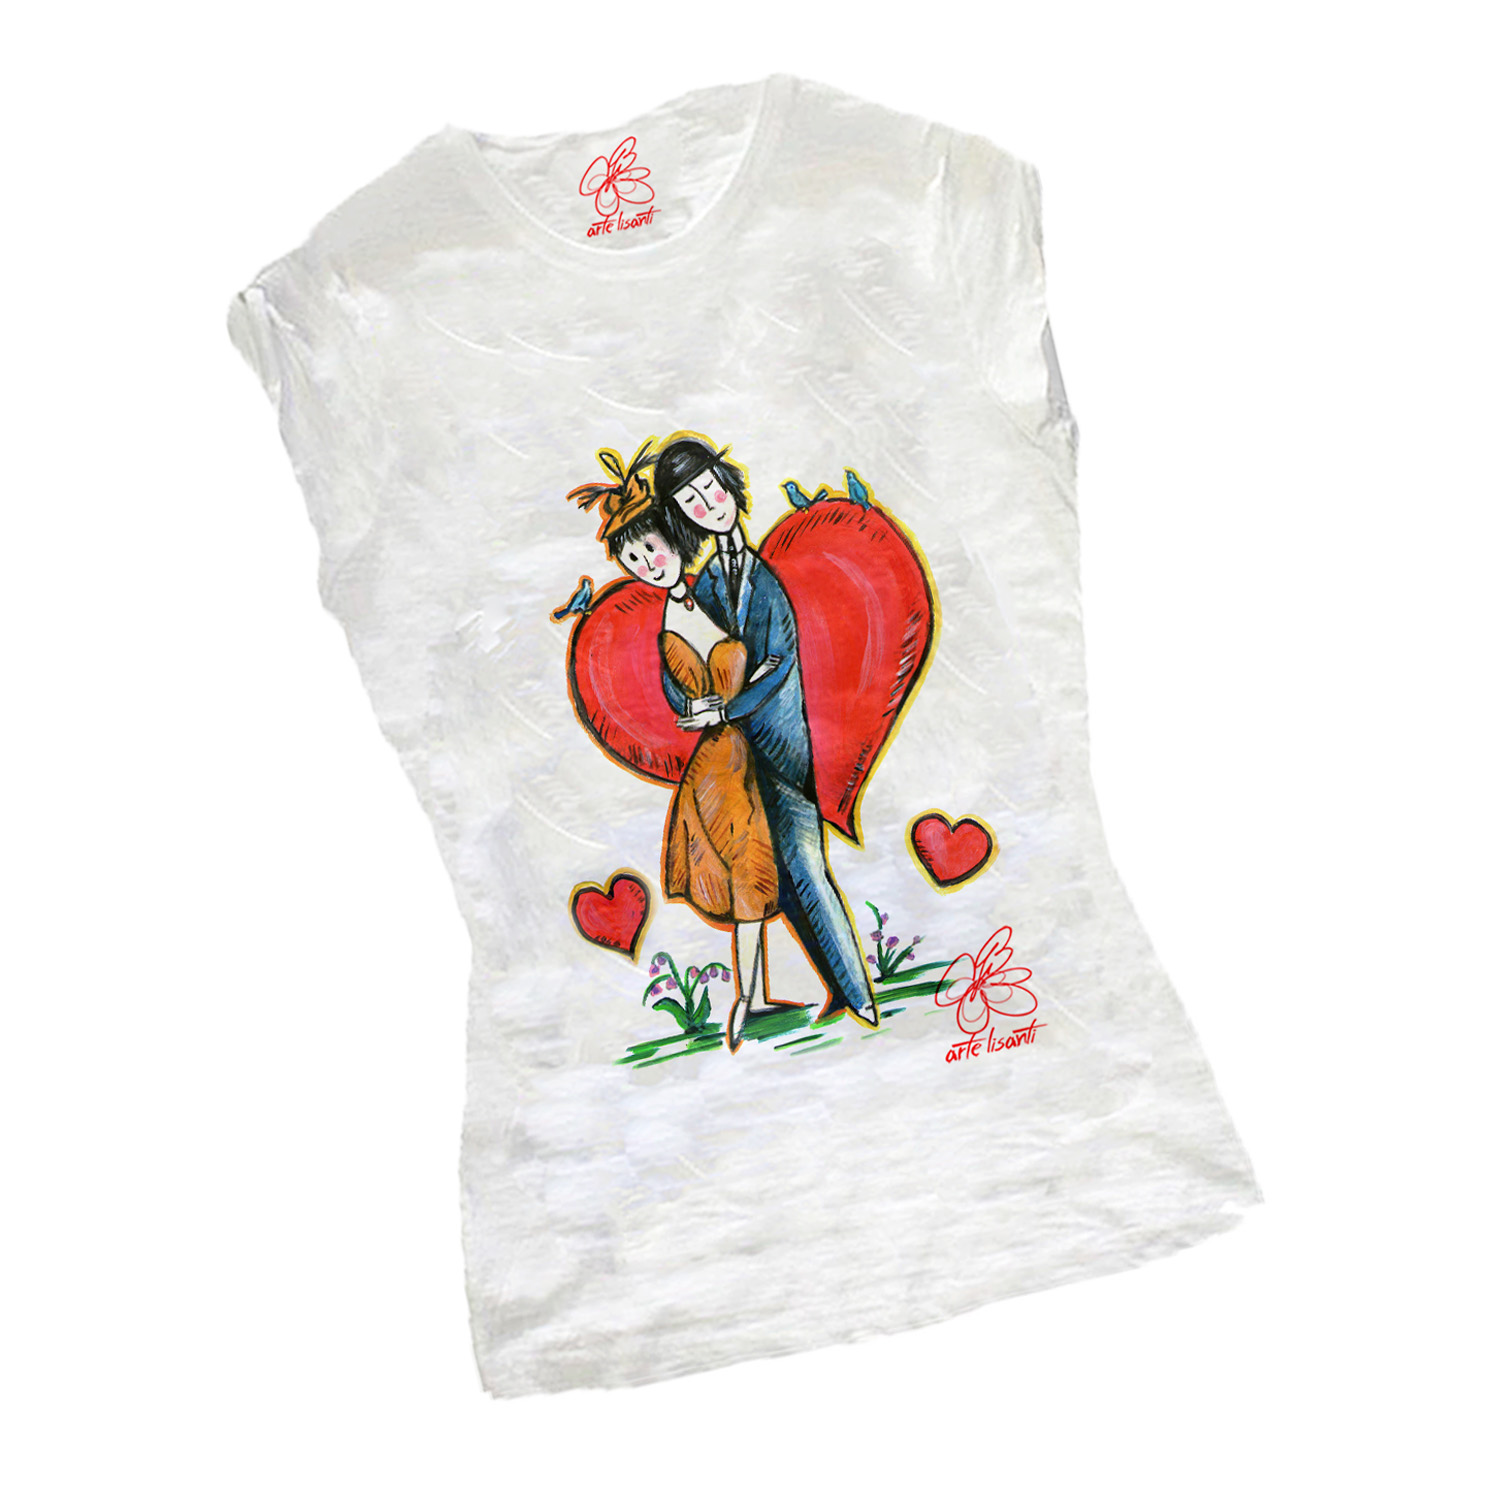 Hand-painted T-shirts - Tribute to lovers by Peynet